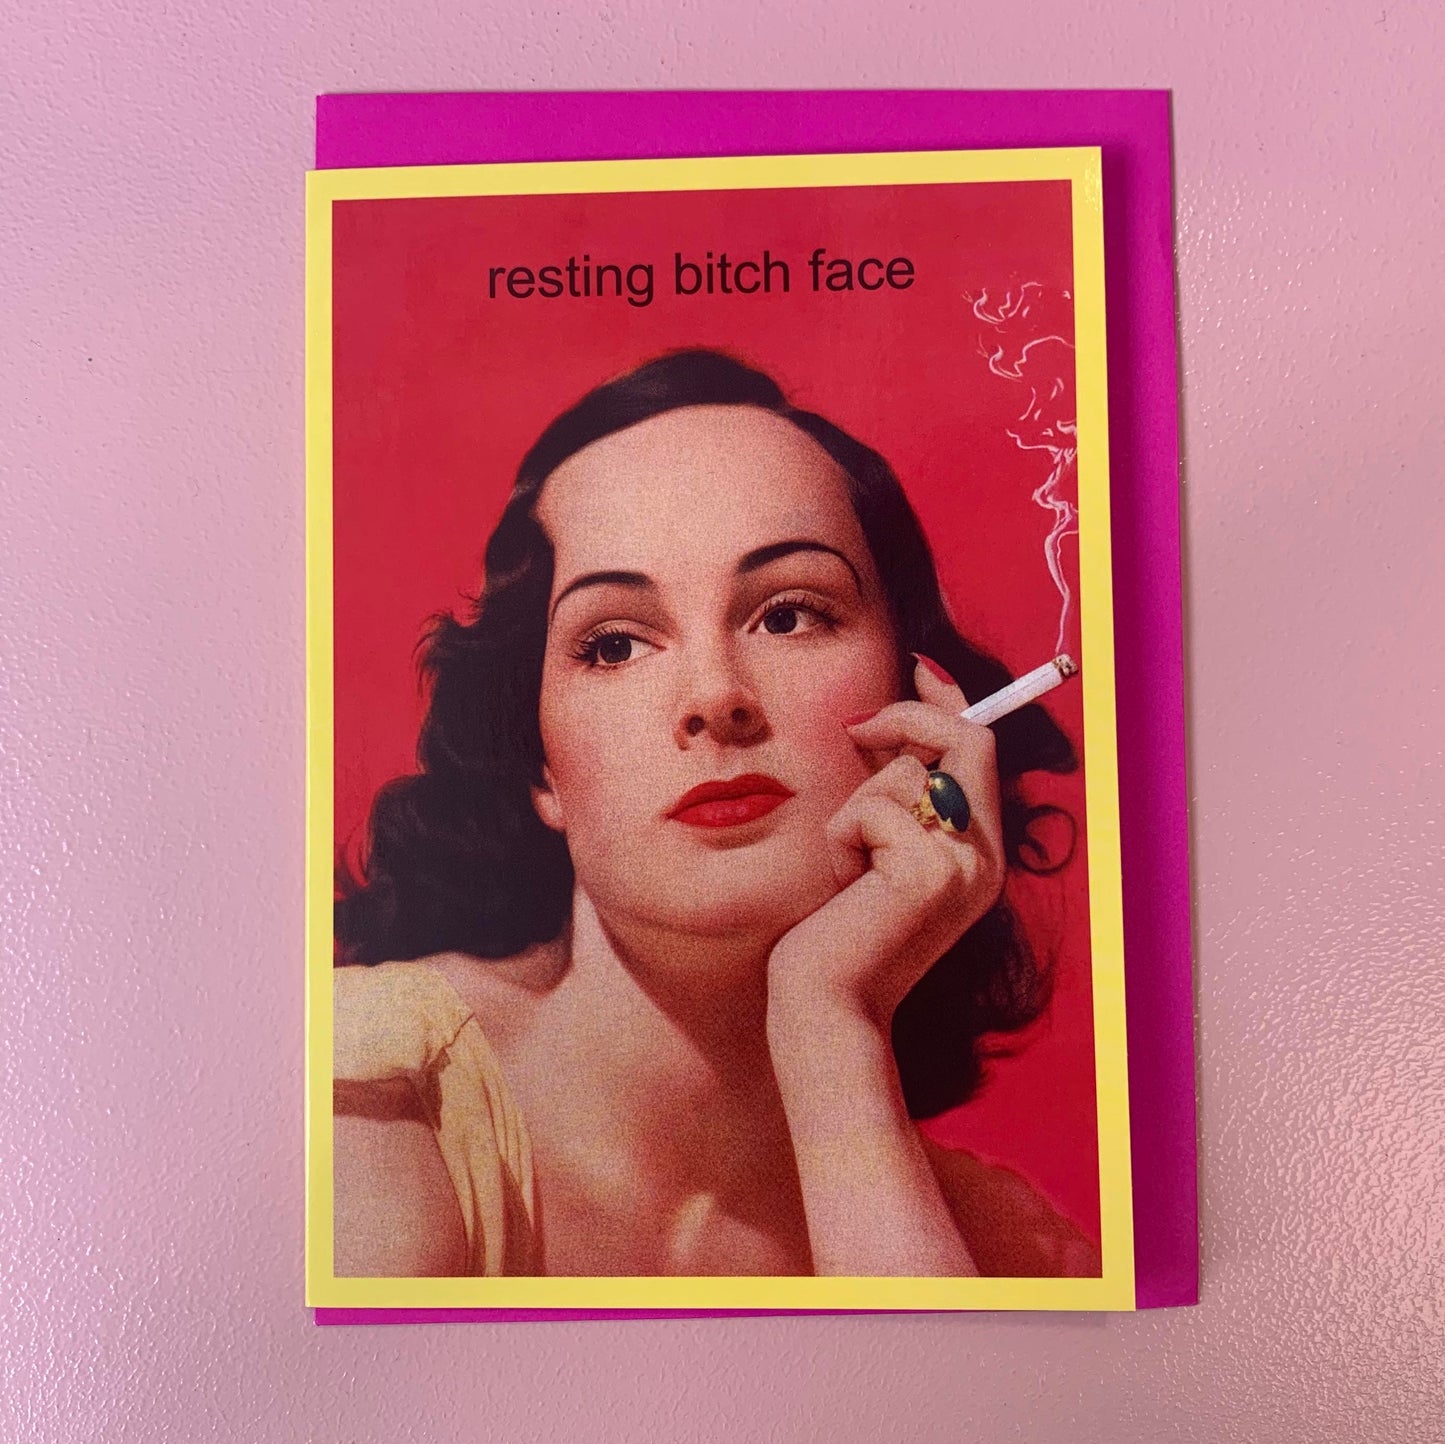 Resting bitch face